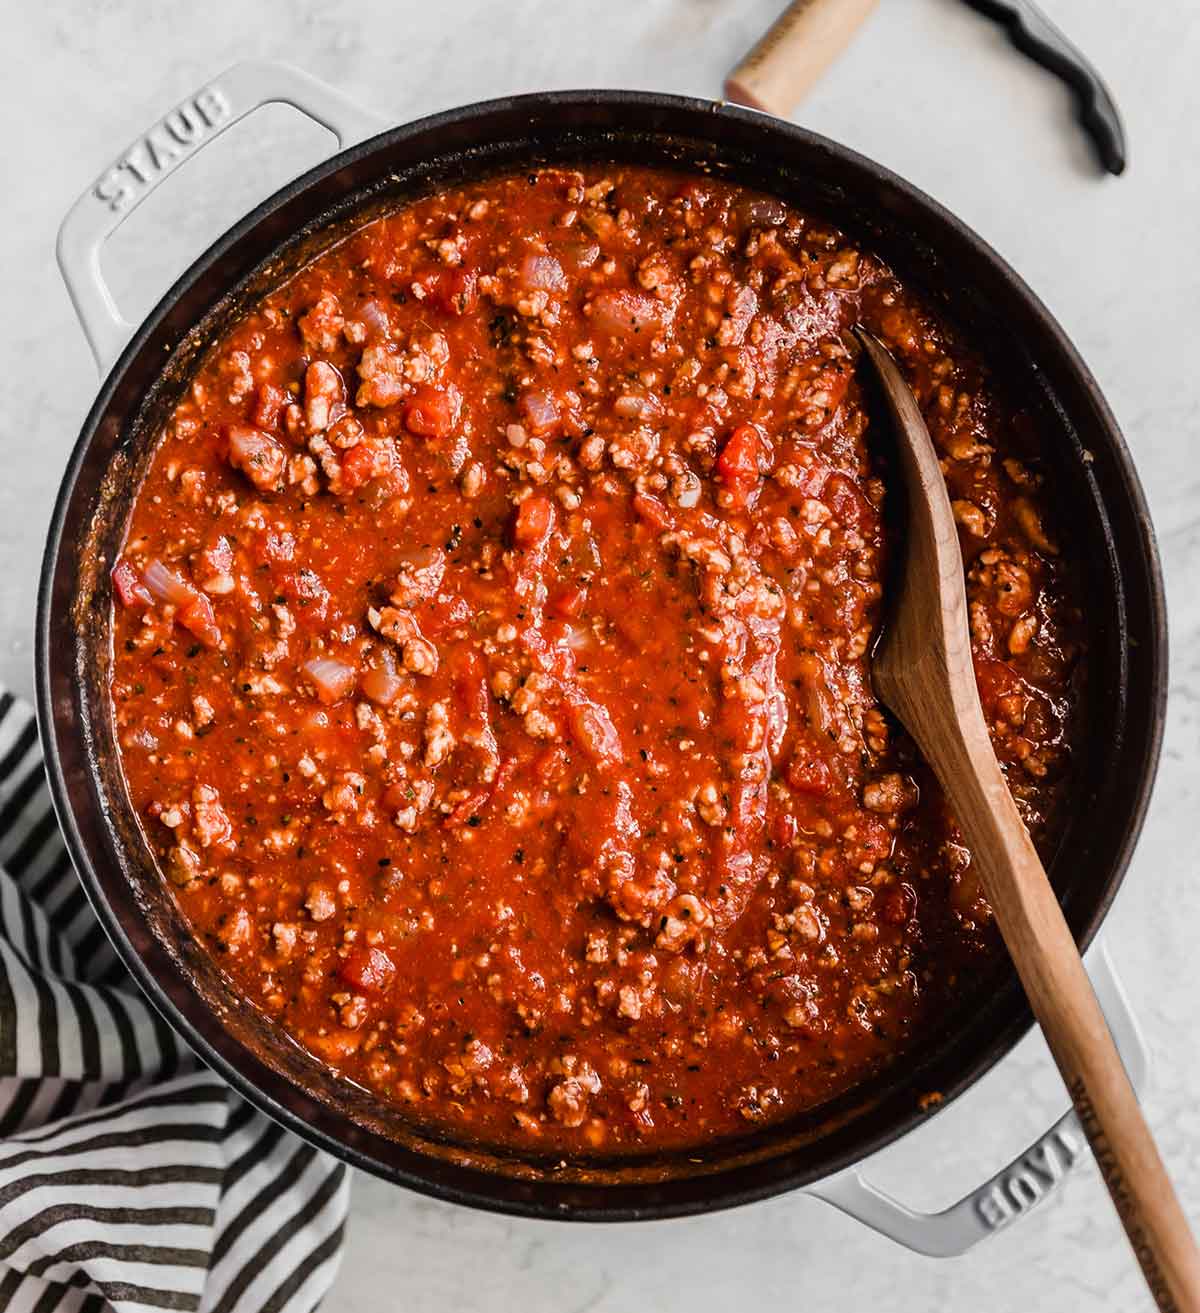 Overhead photo of a pot of meat sauce with a wooden spoon in the pot.